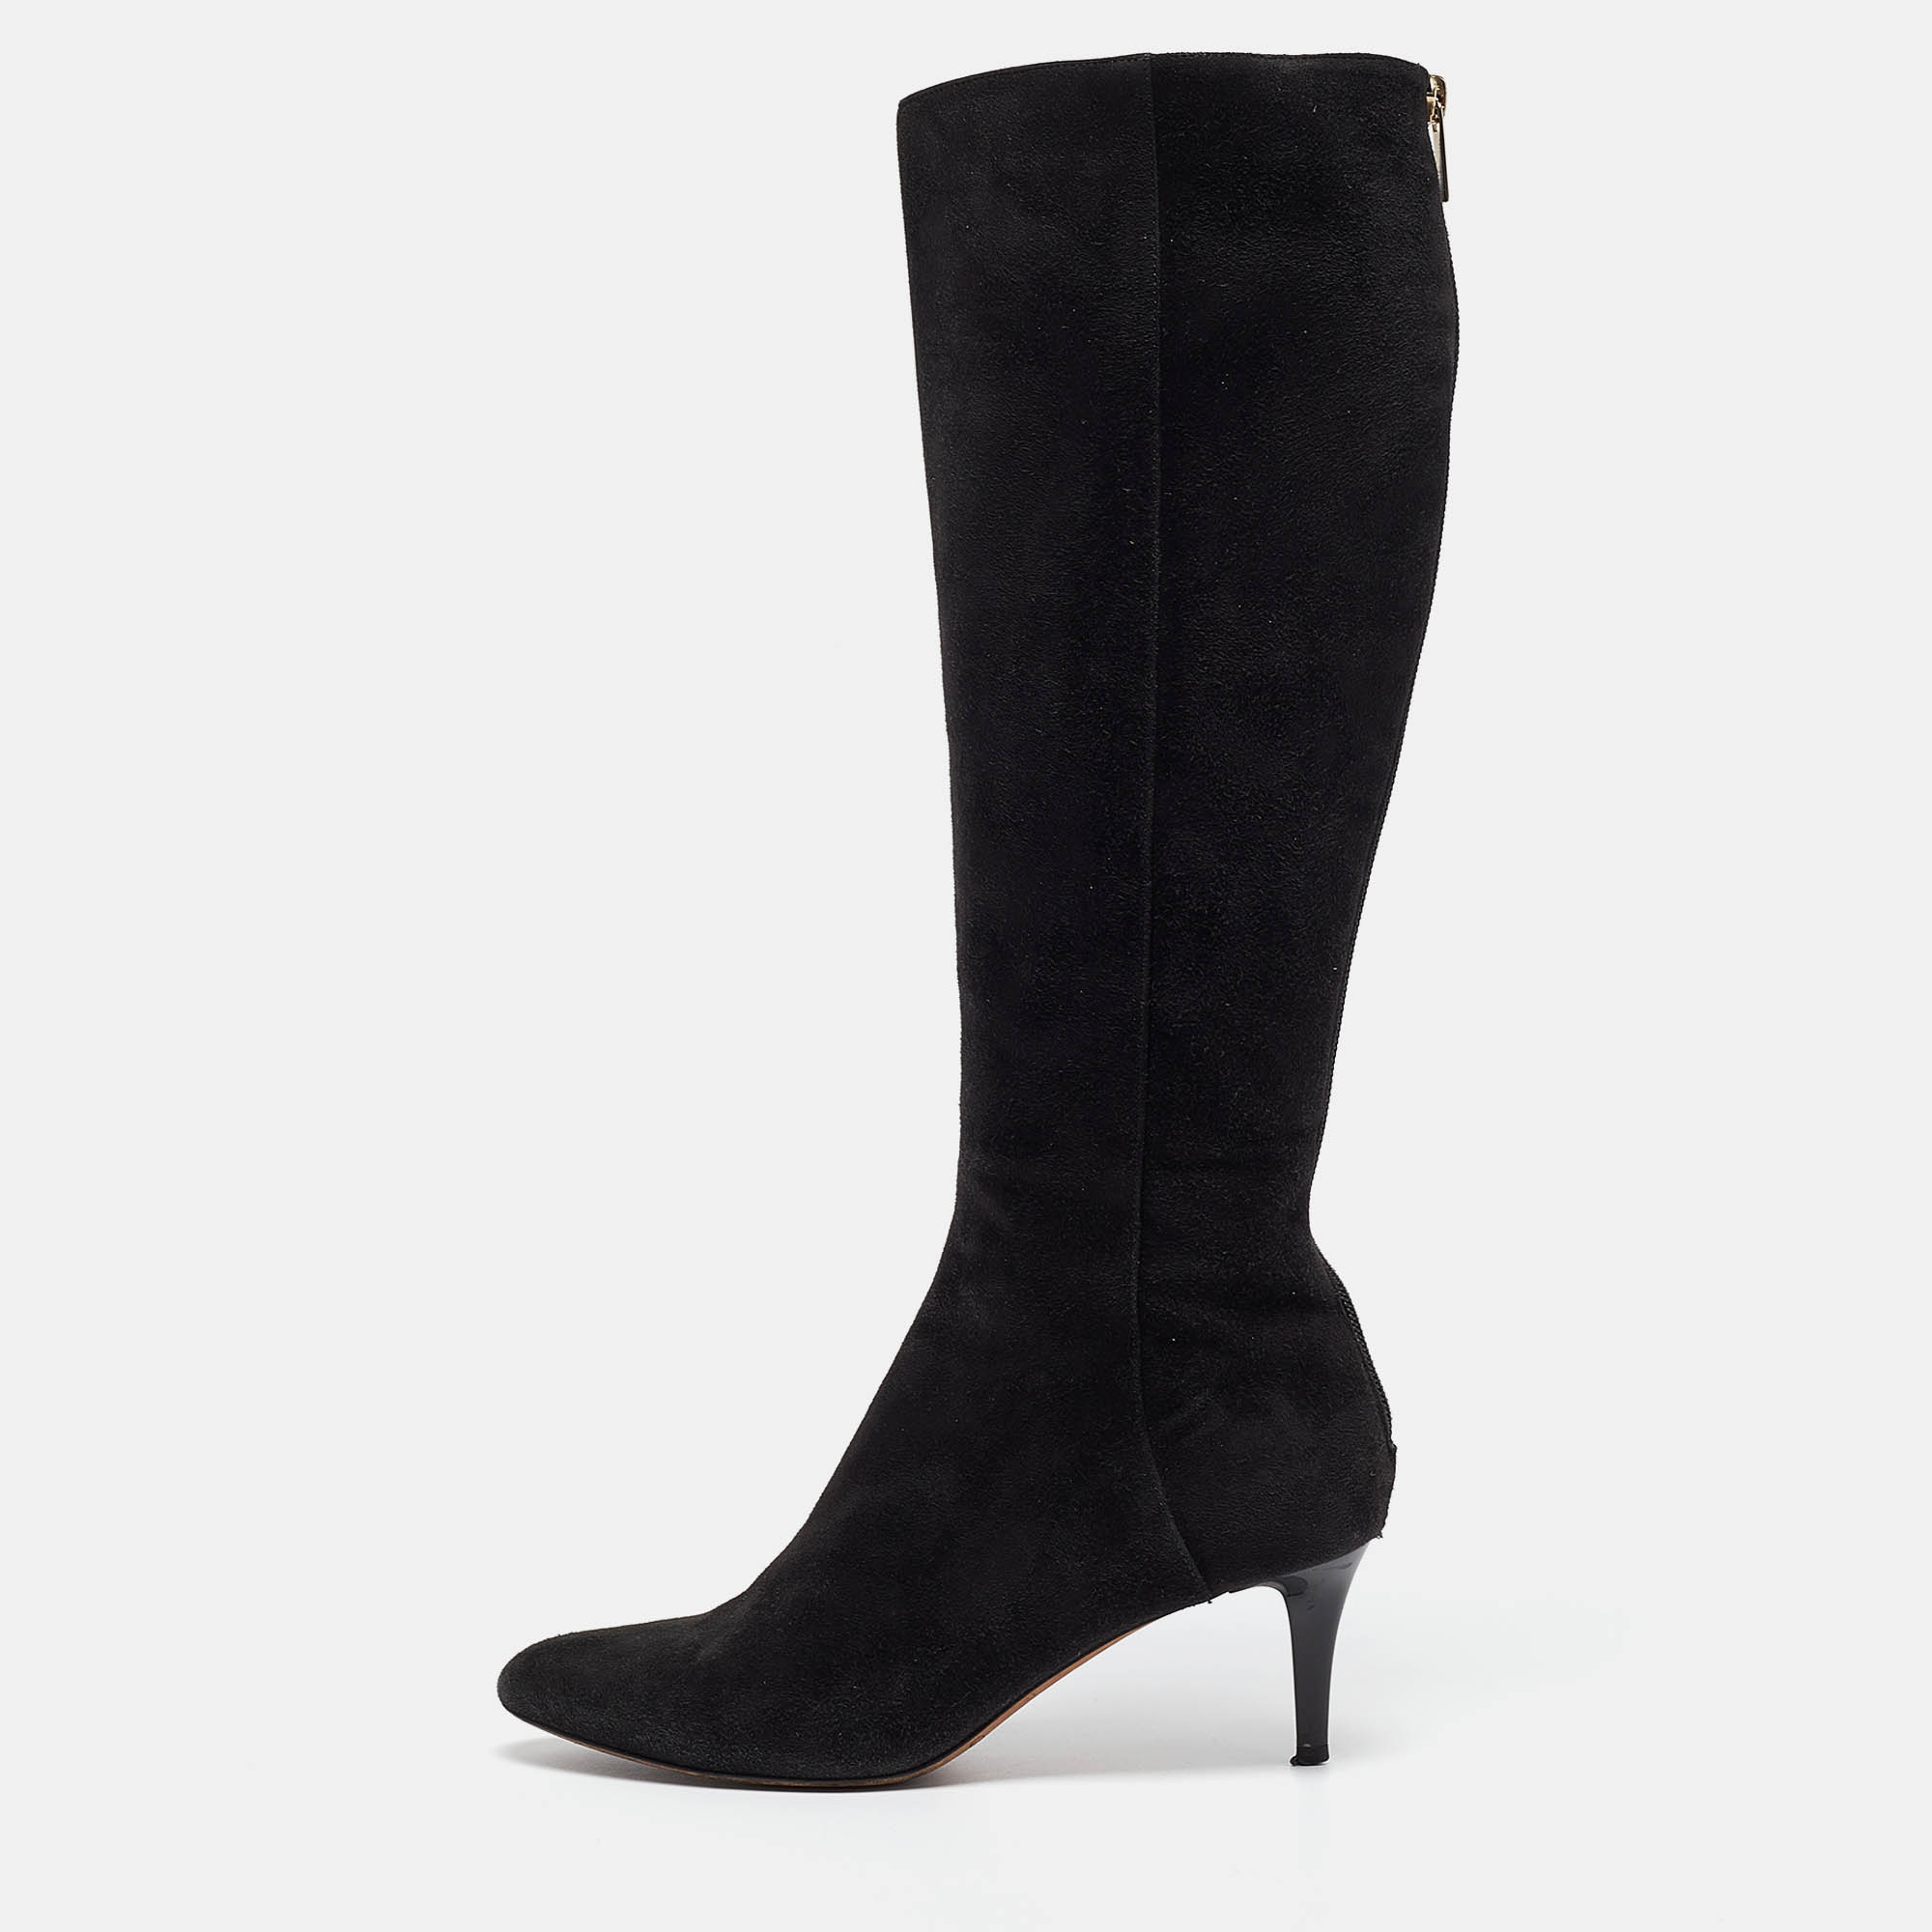 

Jimmy Choo Black Suede Pointed Toe Knee Length Boots Size